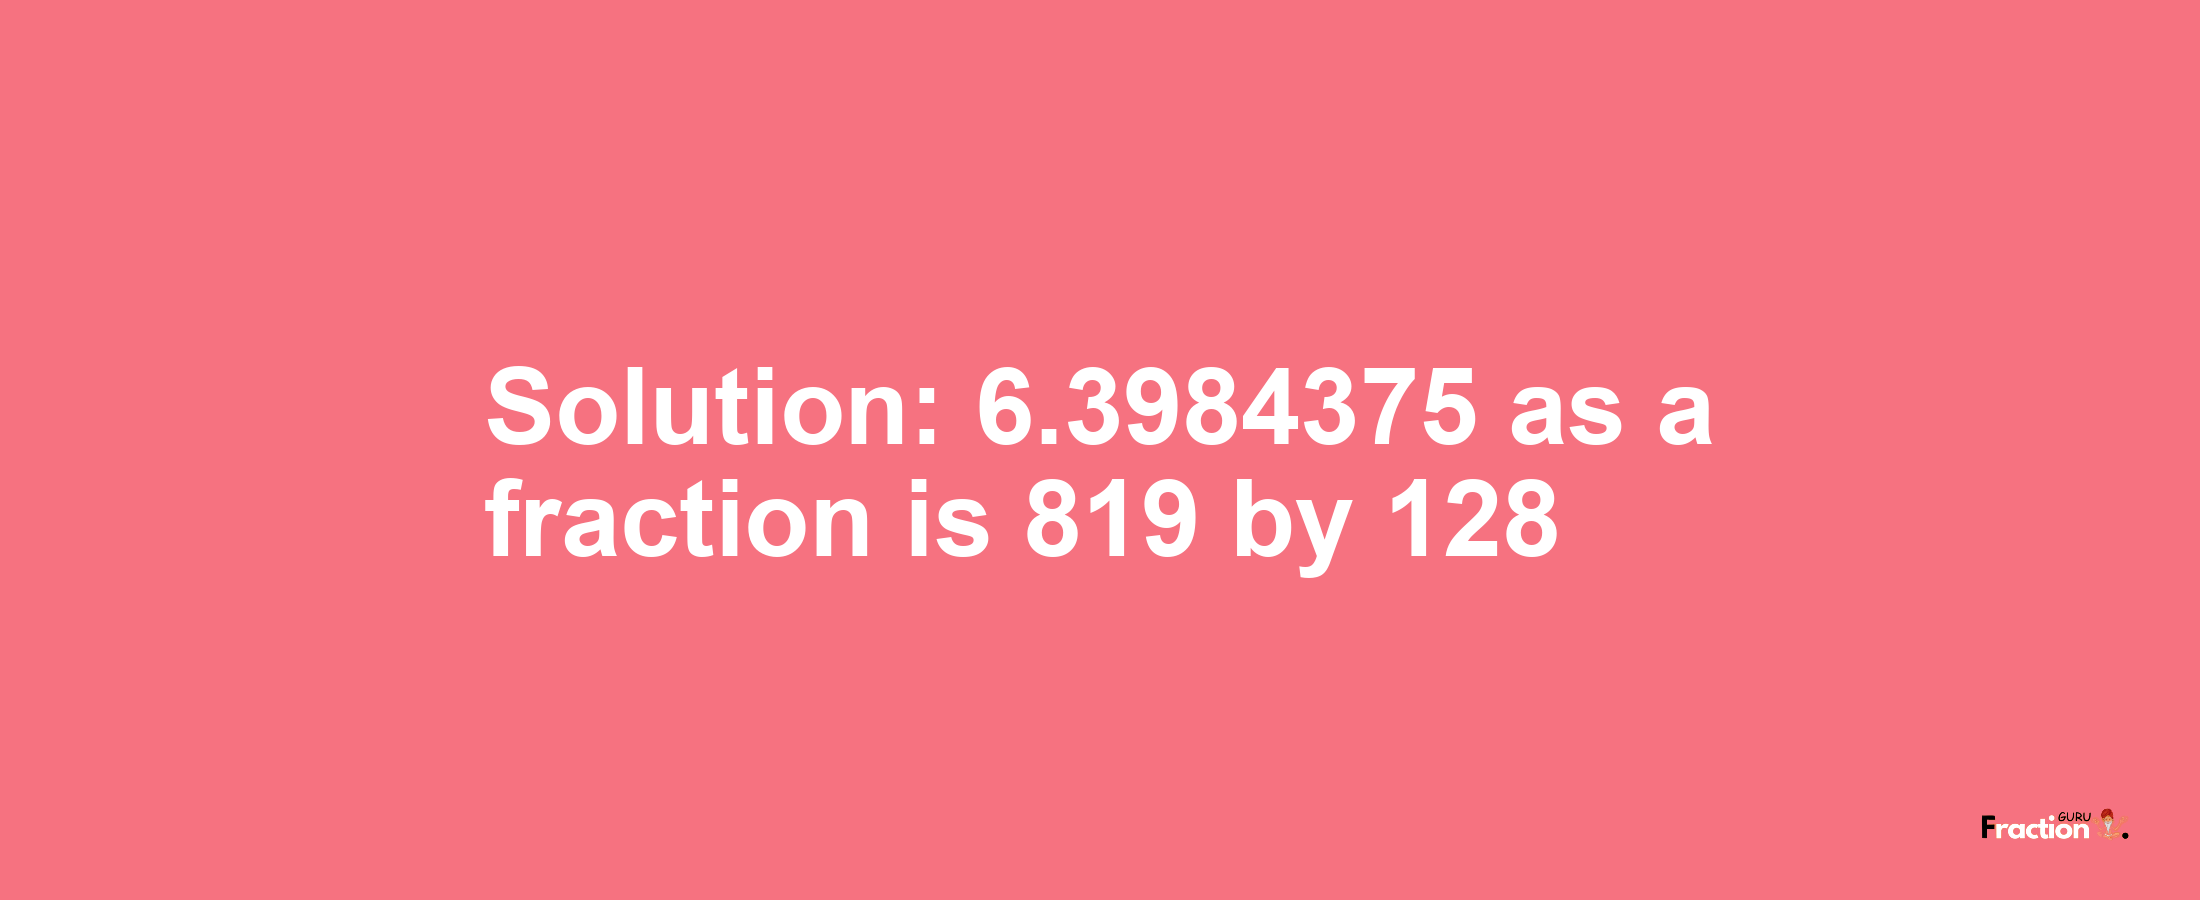 Solution:6.3984375 as a fraction is 819/128